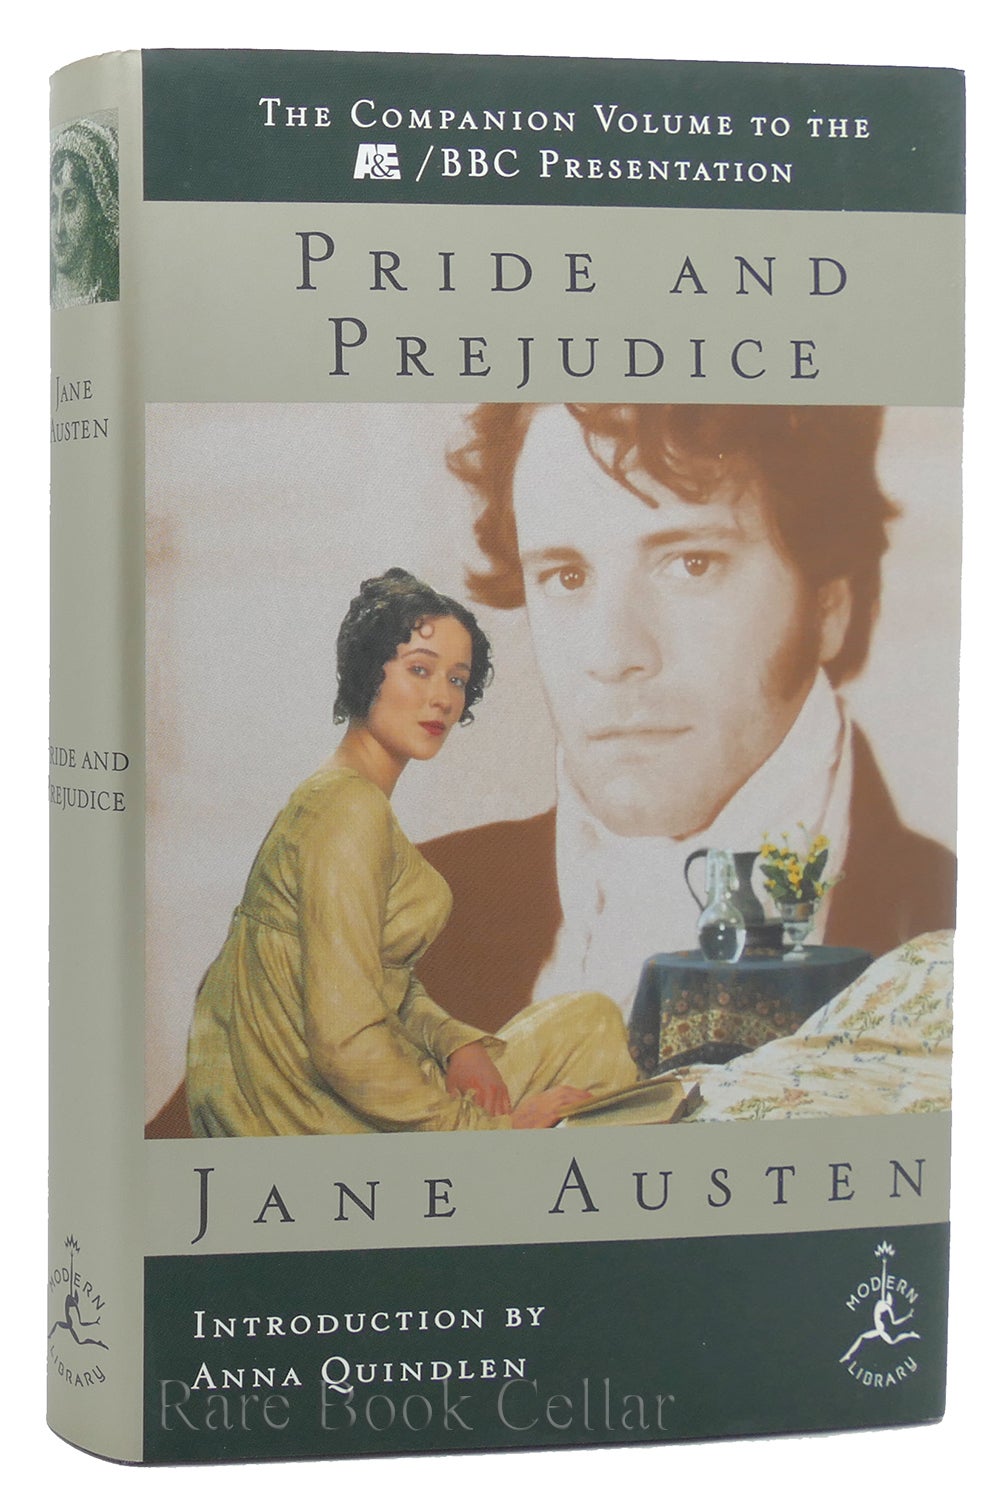 Review: Pride and Prejudice by Jane Austen – Books on the 7:47